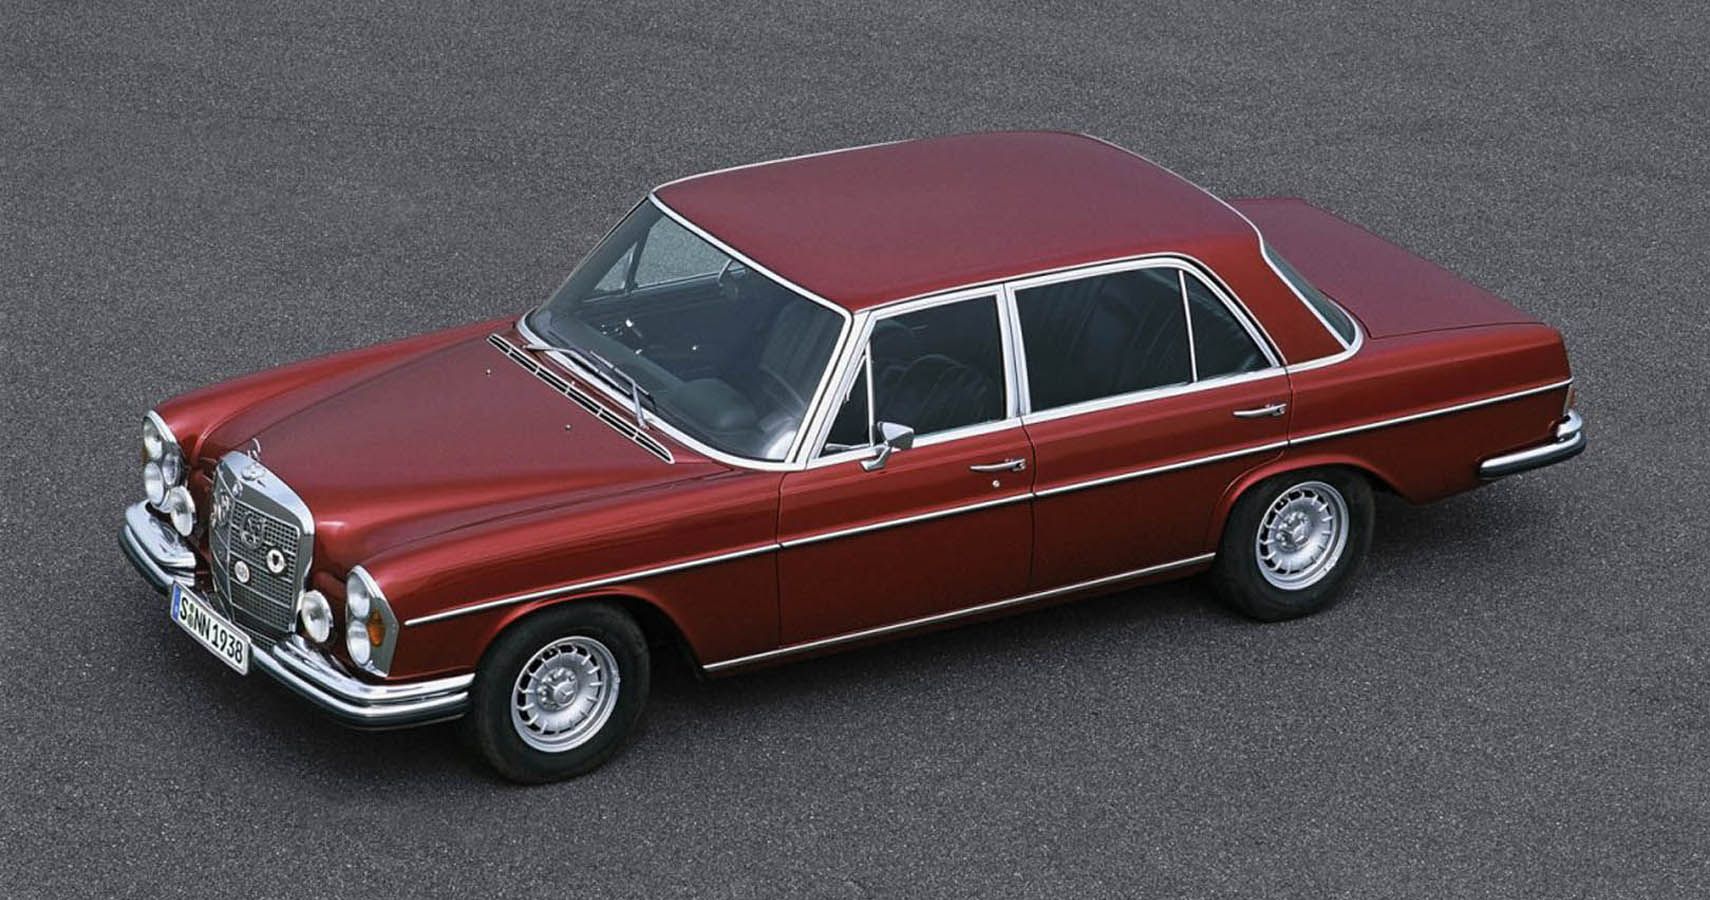 the 1971-made 300sel 6.8, known as the “red pig”. armed with a 6.3-liter v8 that made 247 horses